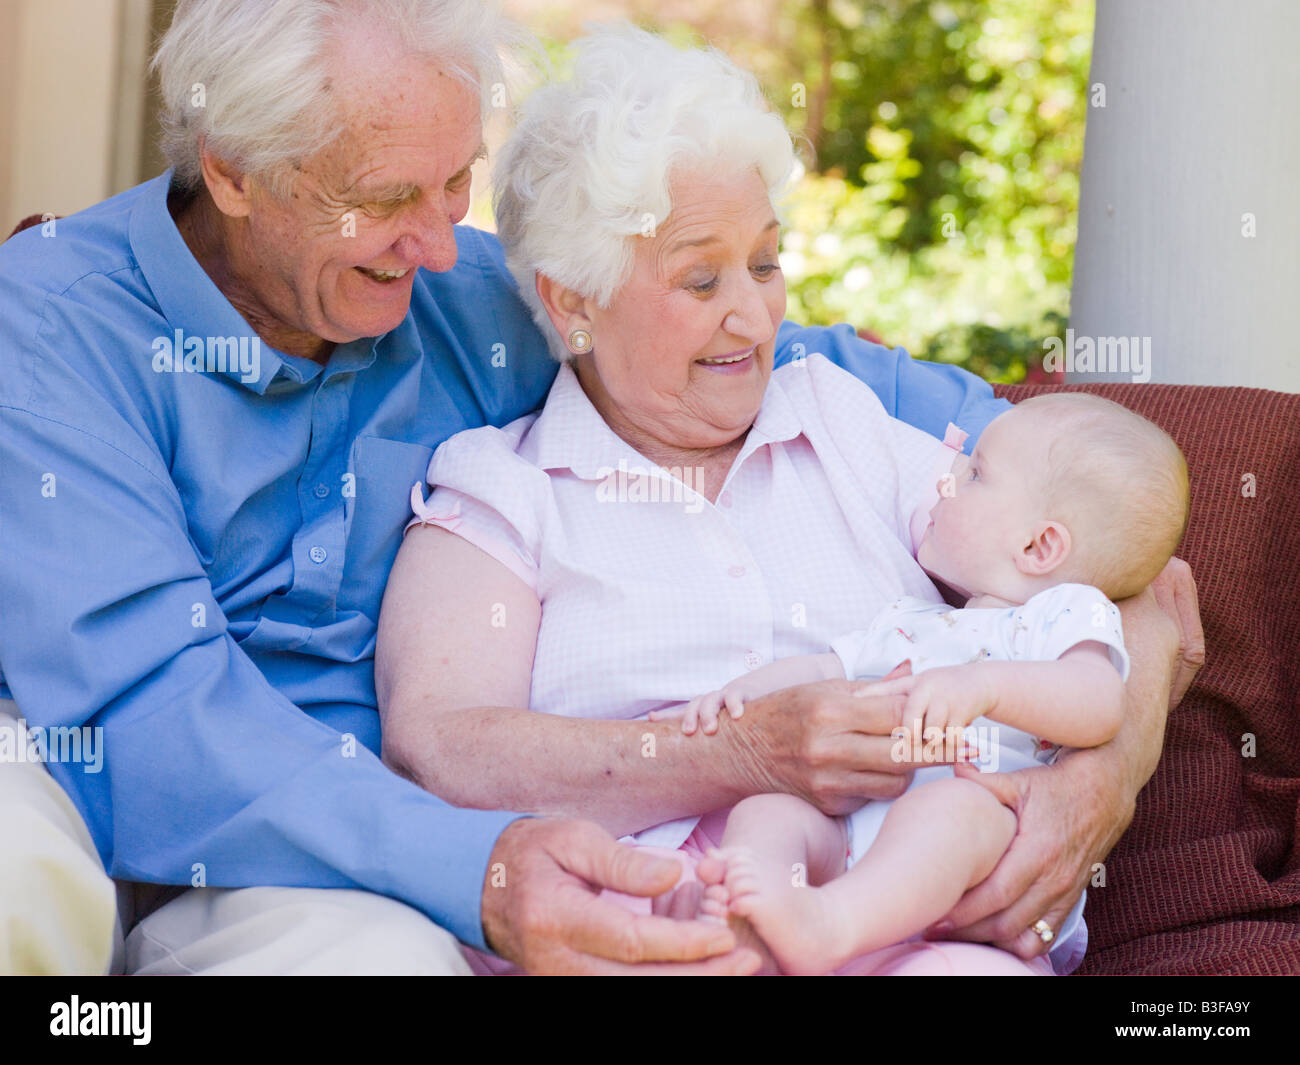 Grandparents outdoors on patio with baby smiling Stock Photo